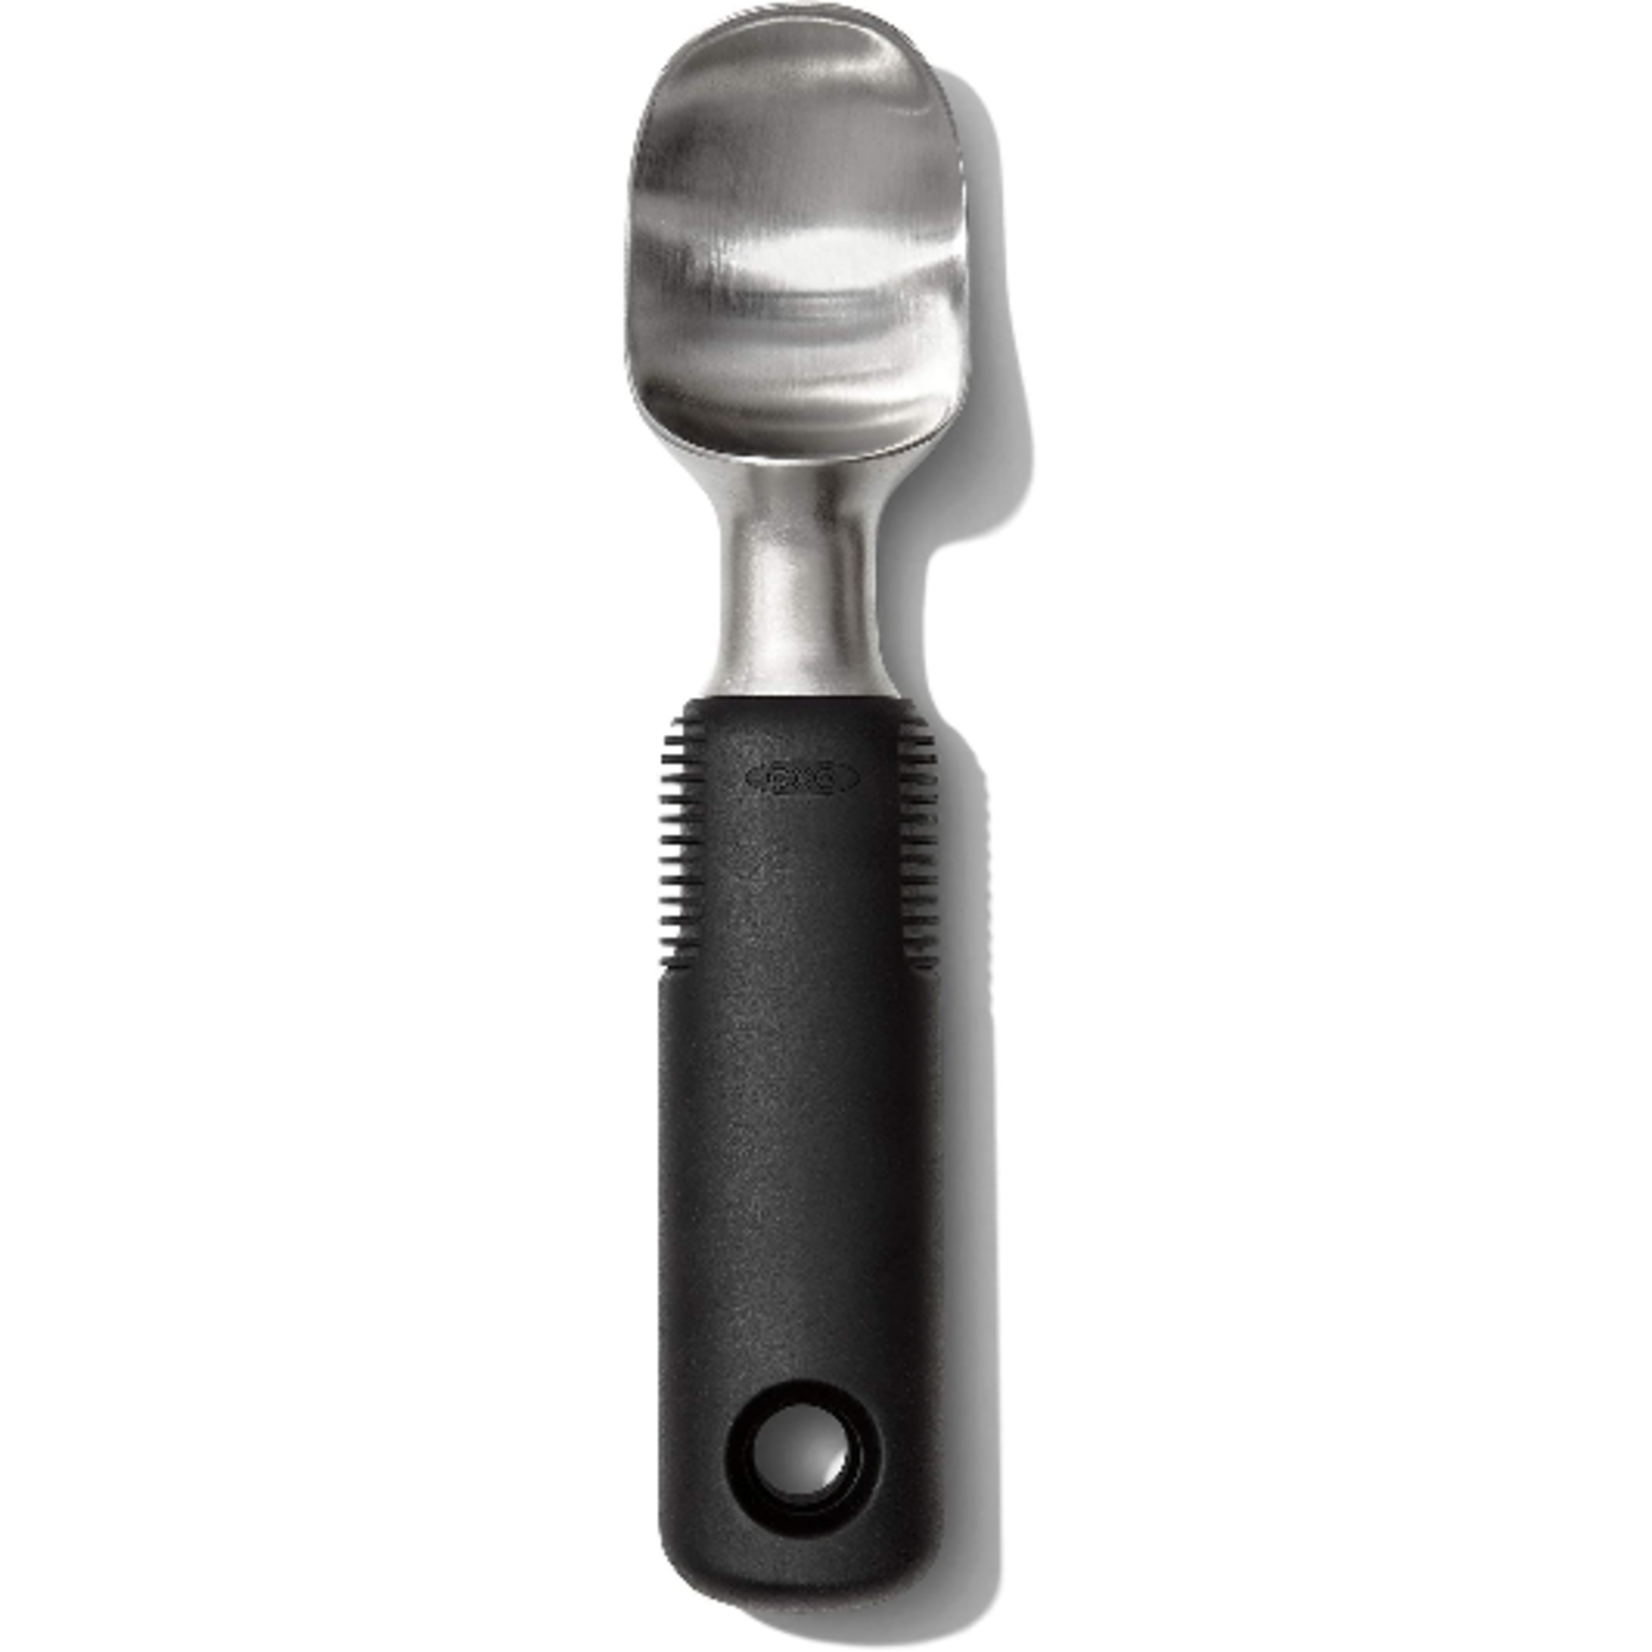  OXO Good Grips Small Cookie Scoop: Home & Kitchen